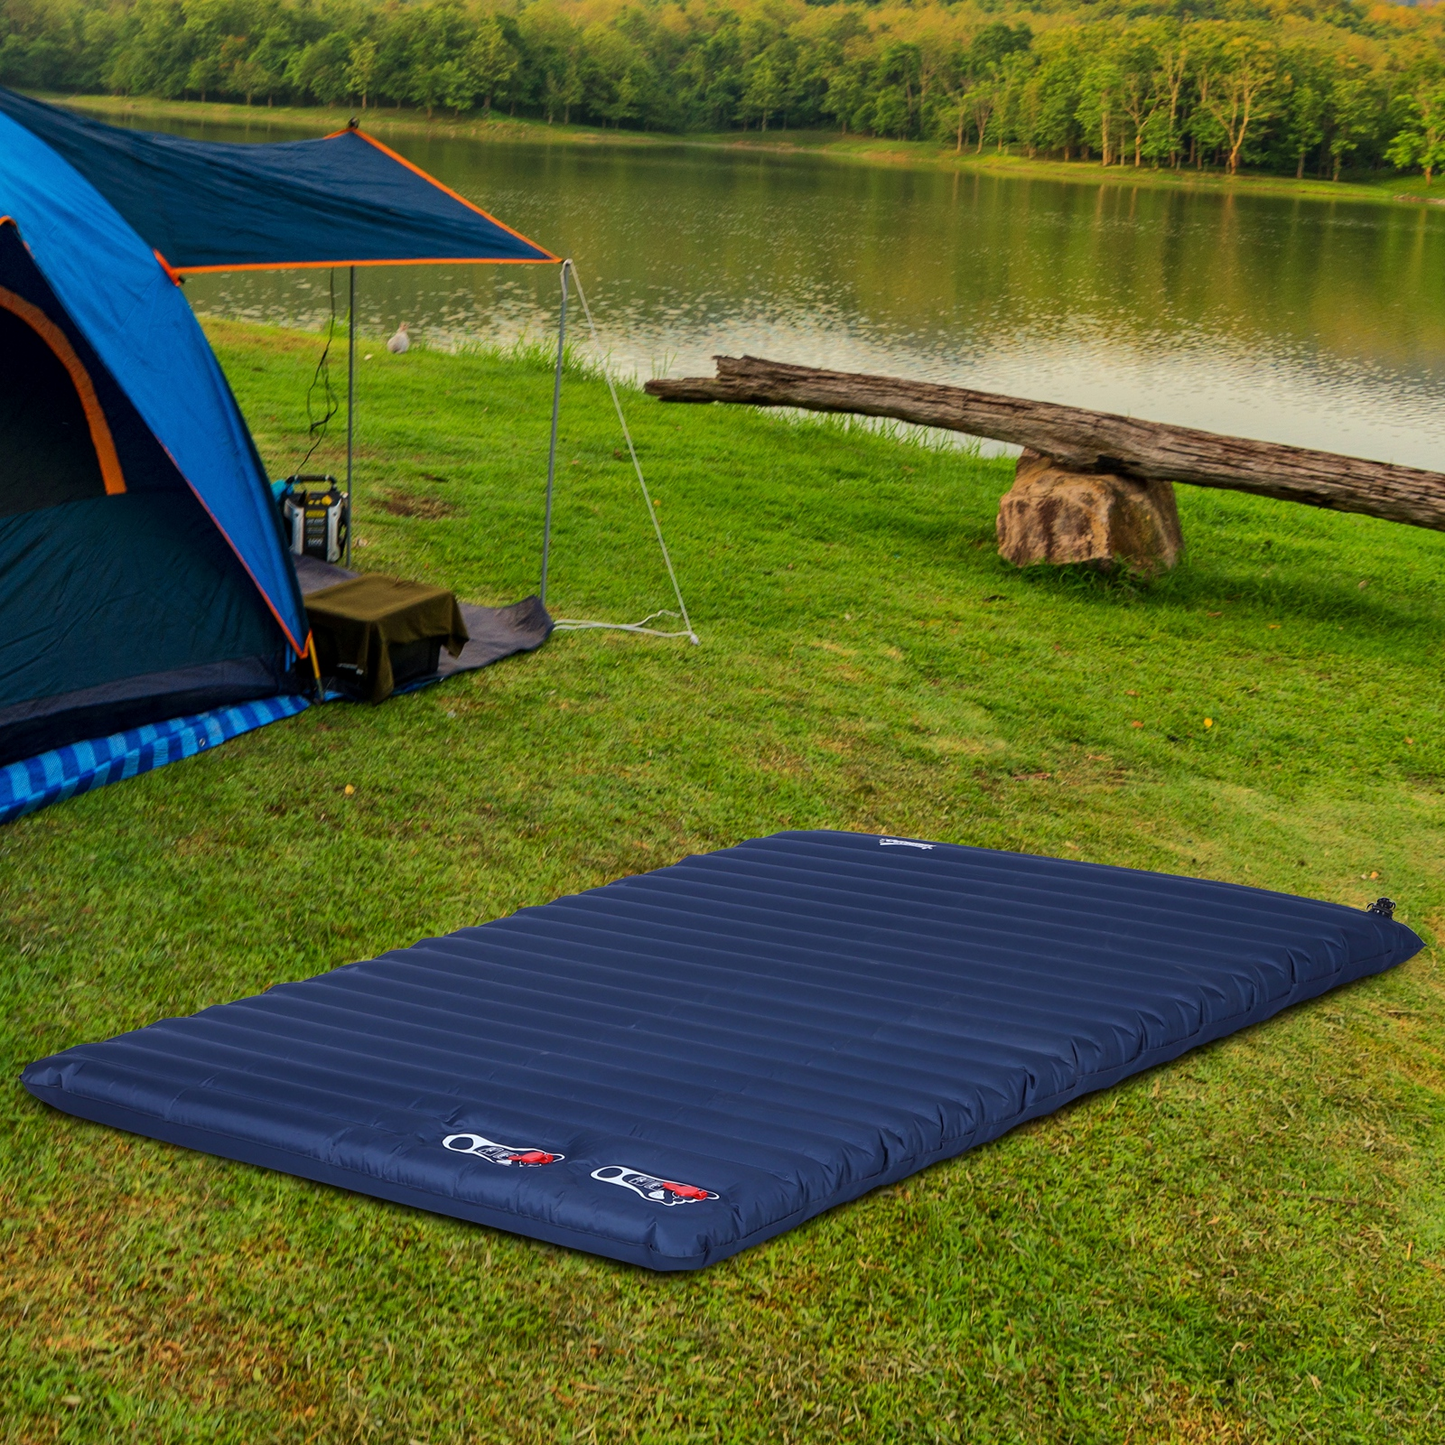 Outsunny 2 Person Camping Inflating Sleeping Mat Inflatable Mattress Ultralight Folding Bed Portable Air Pad for Outdoor Backpacking Hiking Travel - Blue